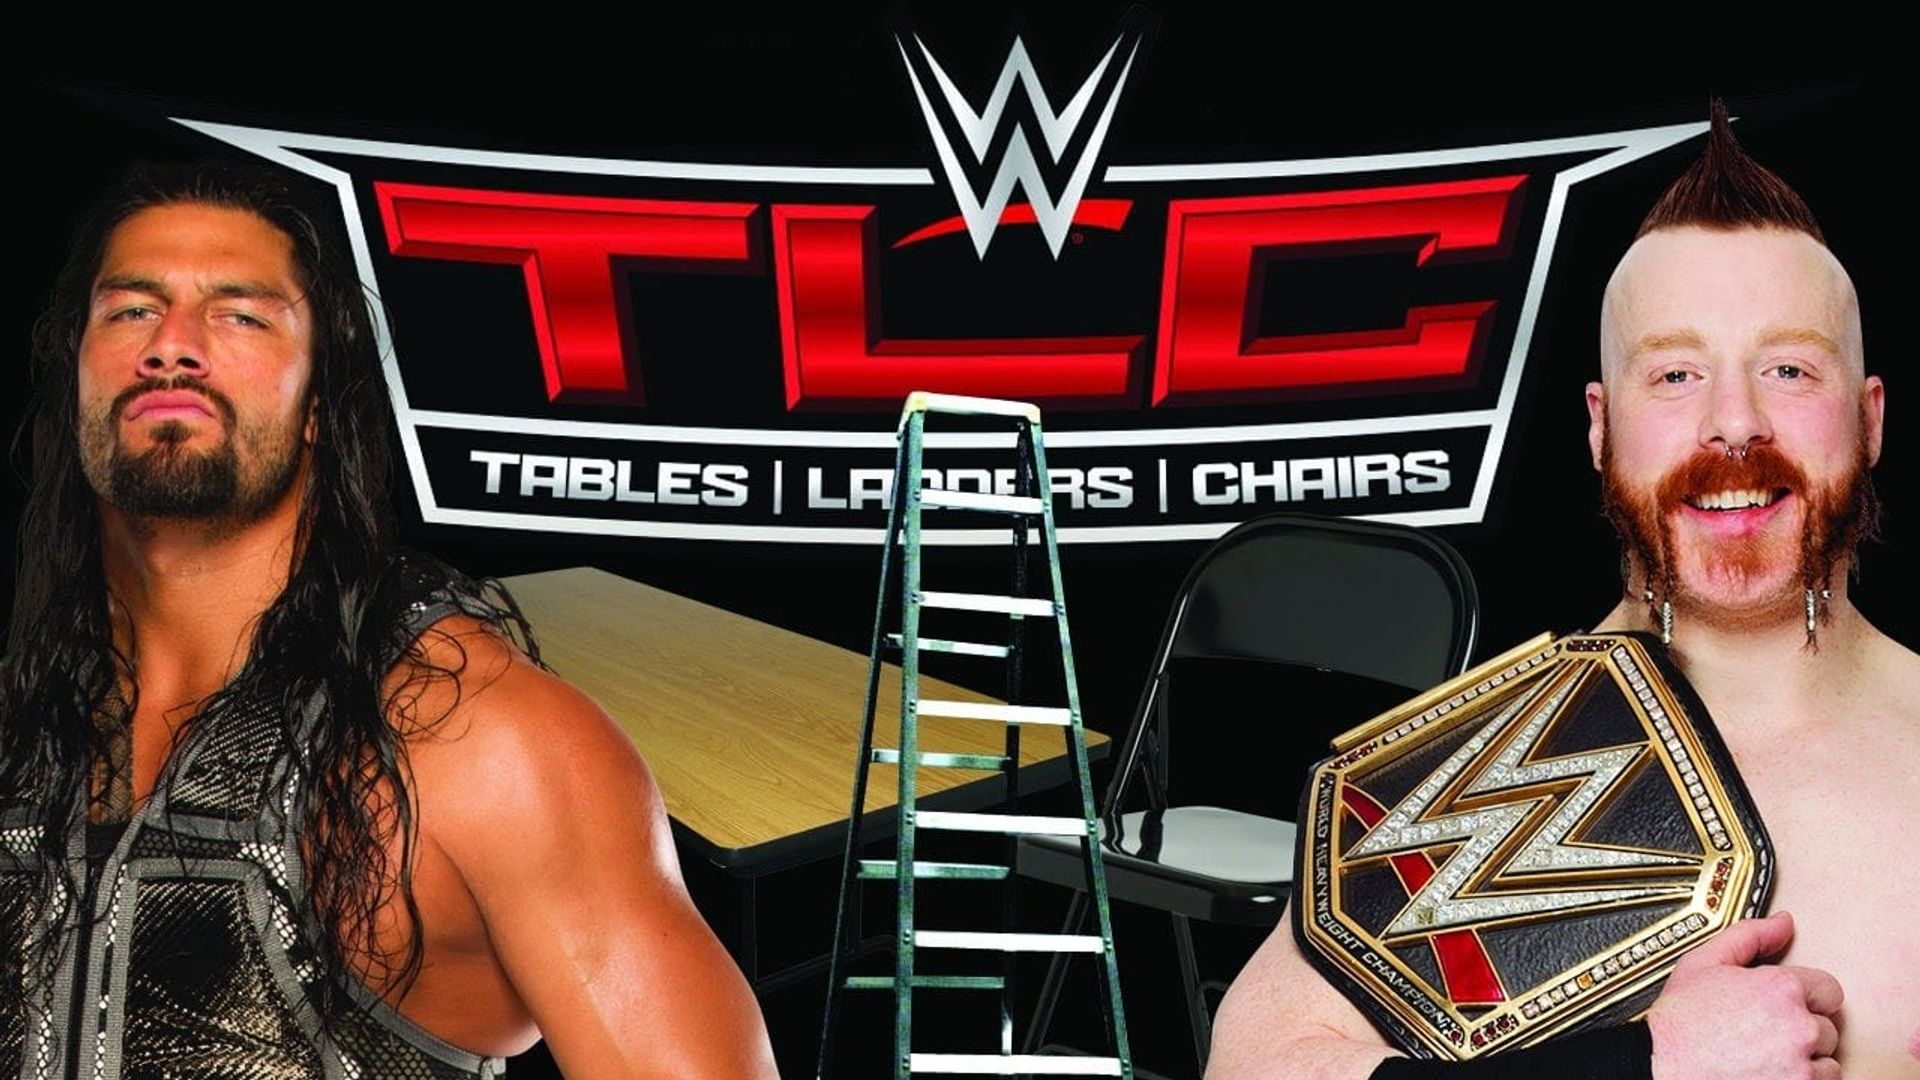 WWE TLC: Tables, Ladders & Chairs 2015 Backdrop